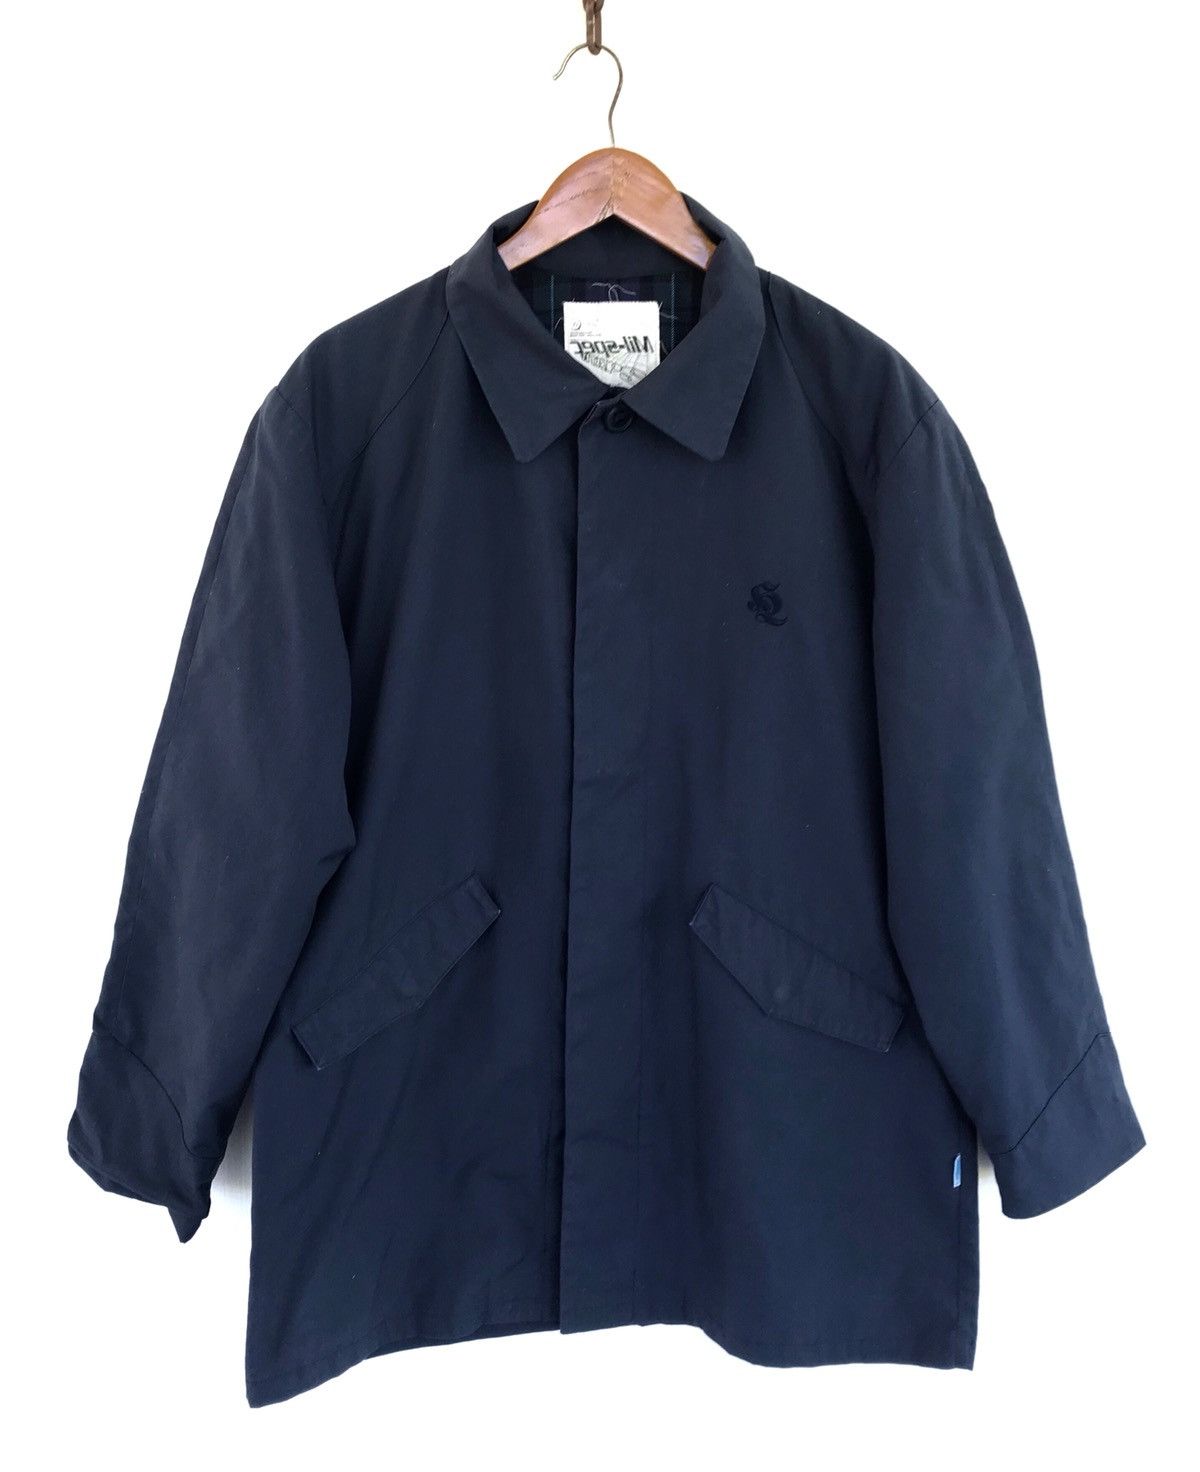 Wtaps Wtaps Dazed And Confused Jacket FW/09 | Grailed